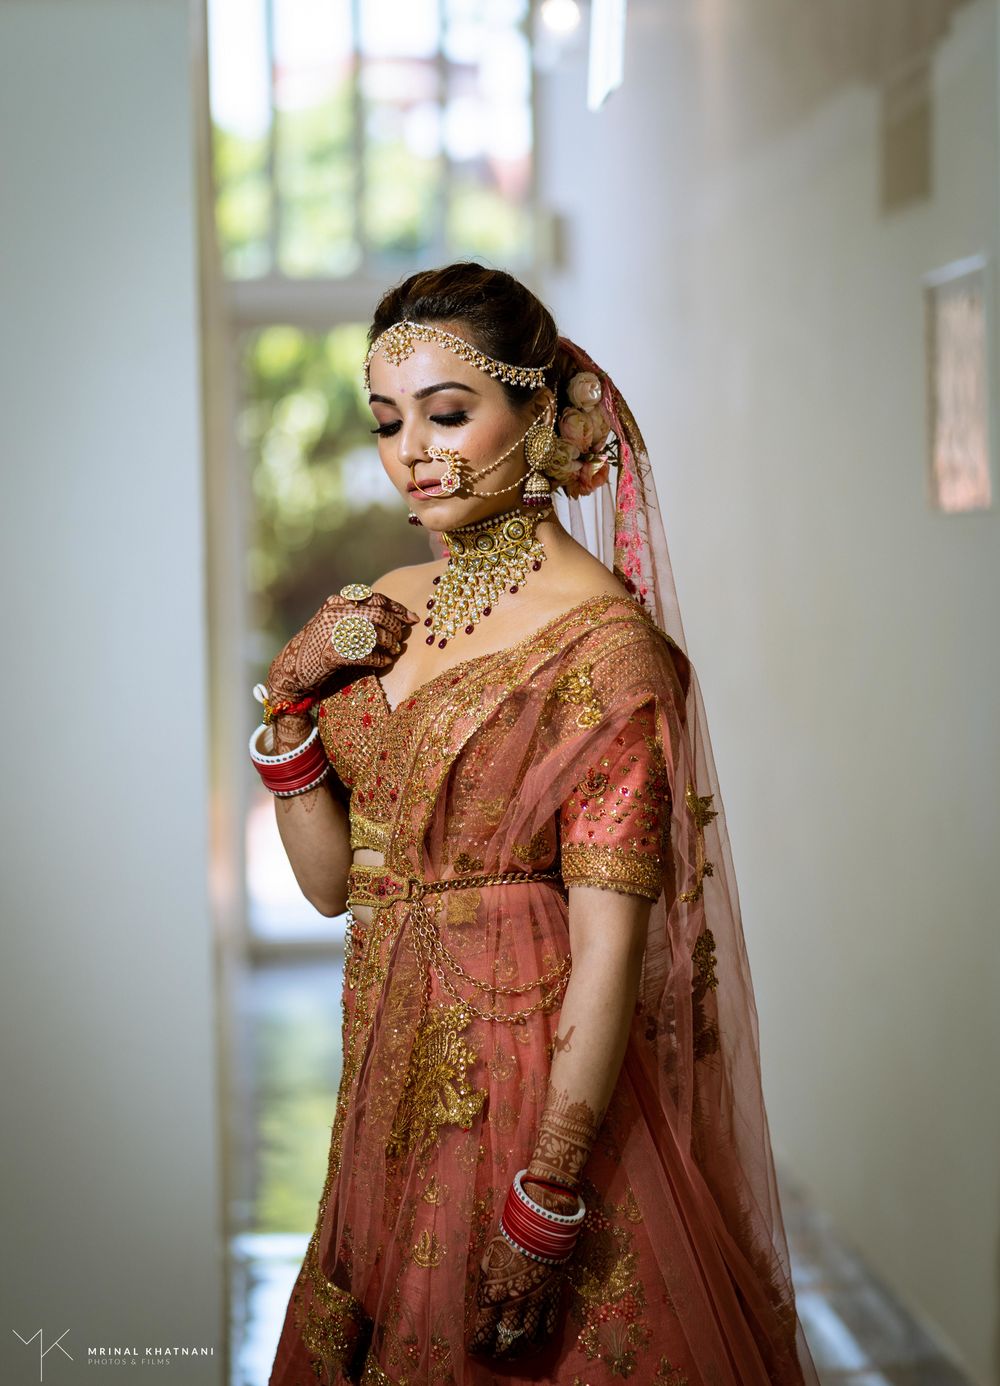 Photo of A beautiful bride in a stunning peach lehenga with marvellous gold jewellery.